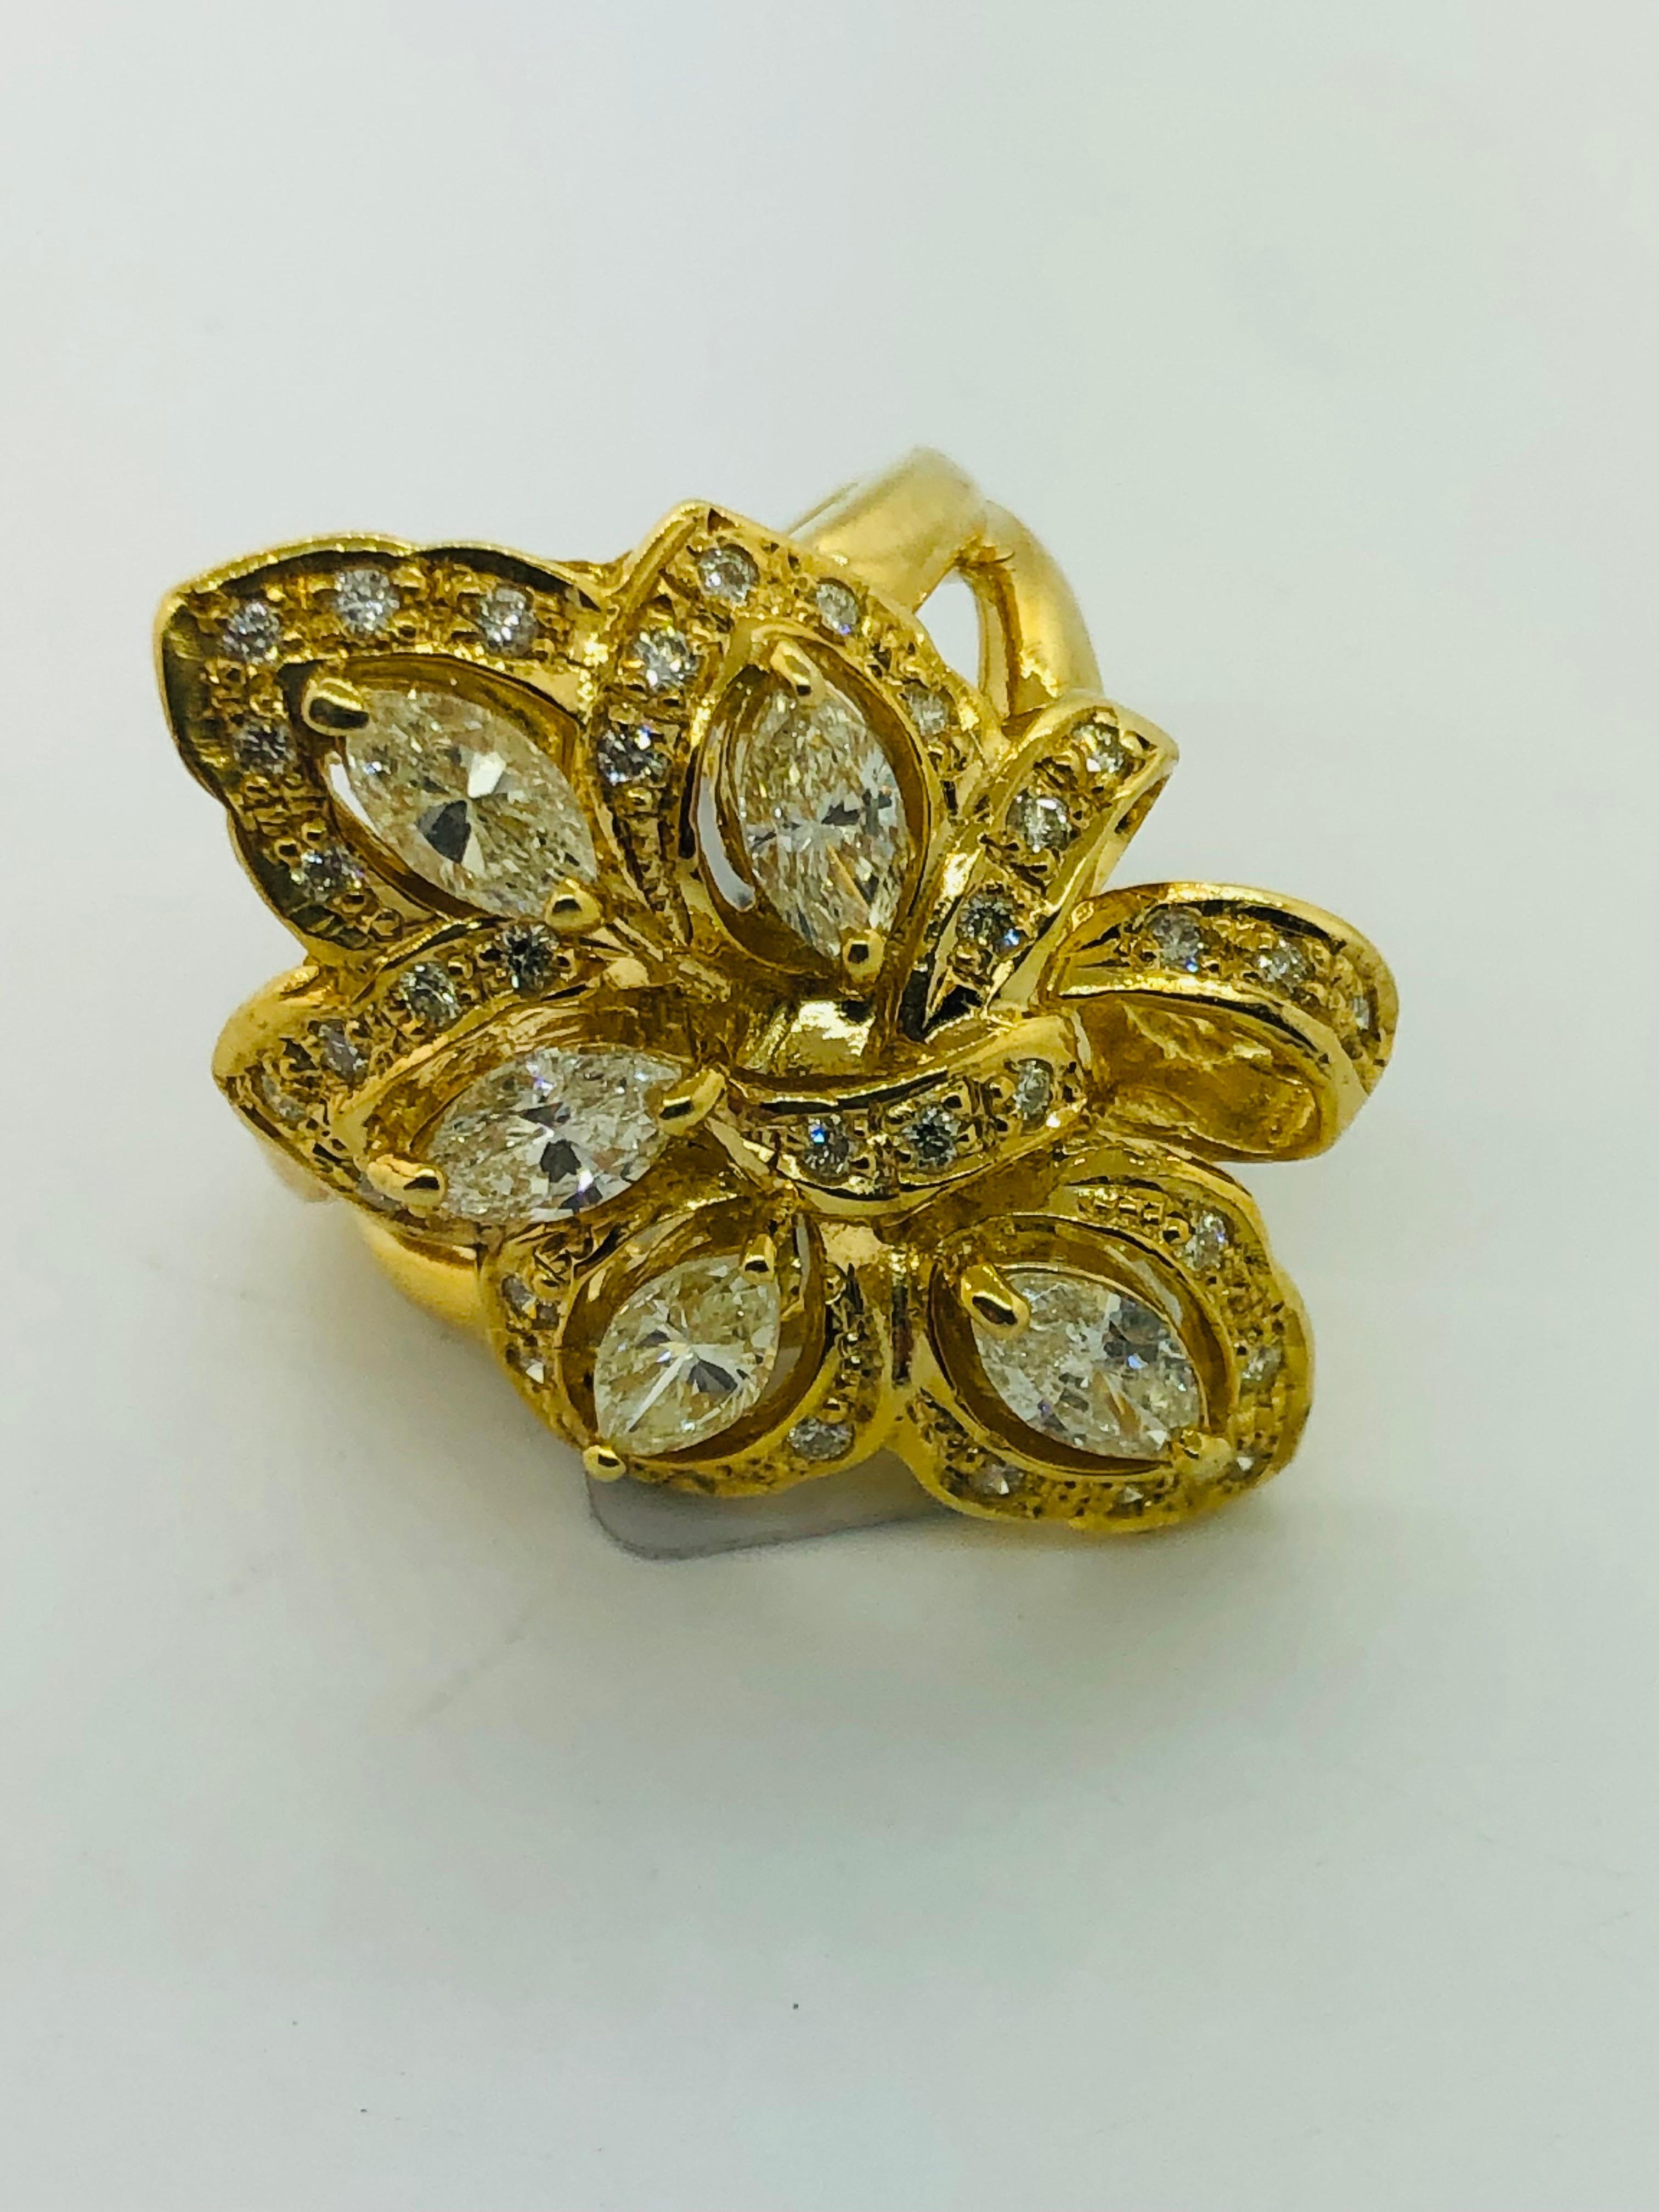 Showcasing a simply beautiful, elegant, and finely detailed vintage estate ring, featuring five center stone marquise diamonds securely hand set, weighing approx. 1.86 total carat weight with natural round white diamonds on the sides; approx. 0.44